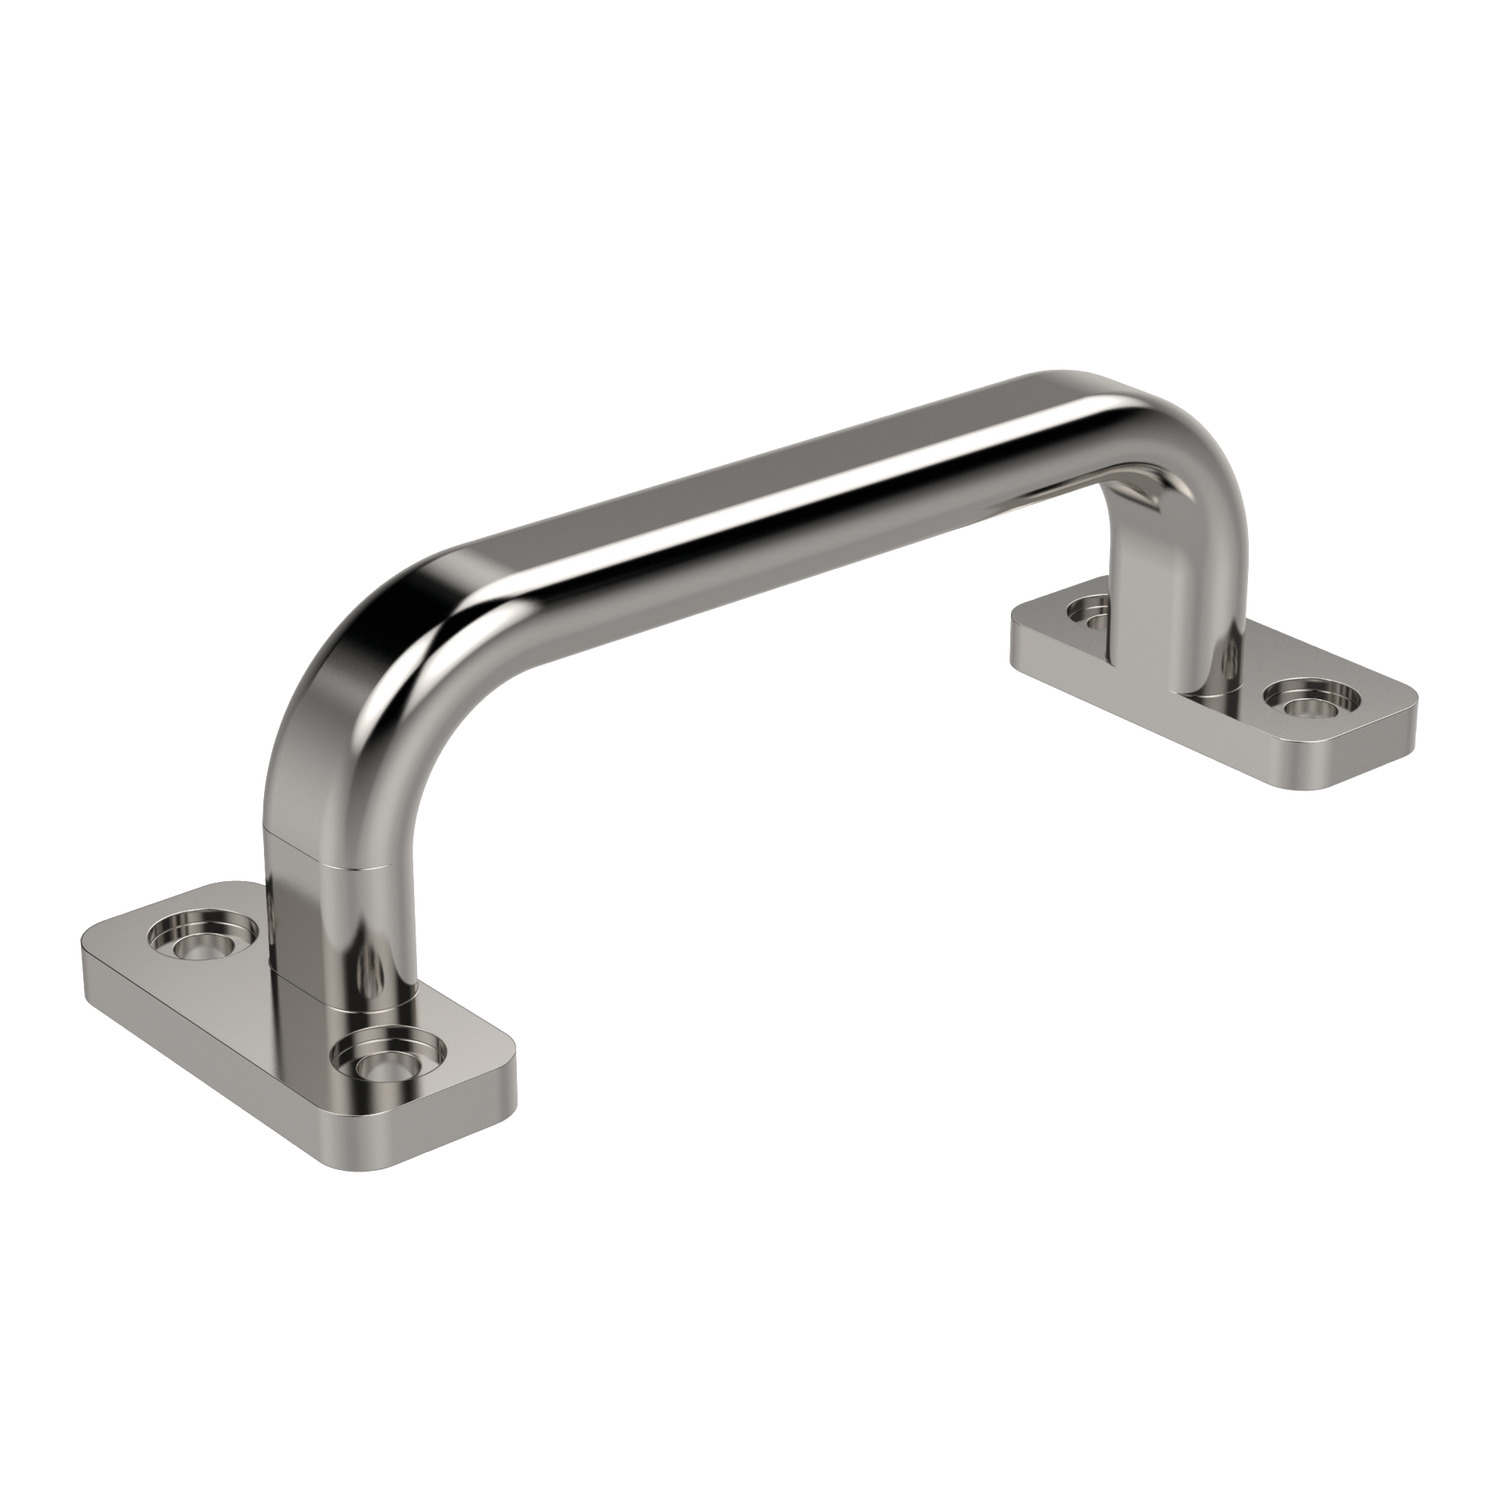 Product 78890, Pull Handles, Stainless Steel  / 